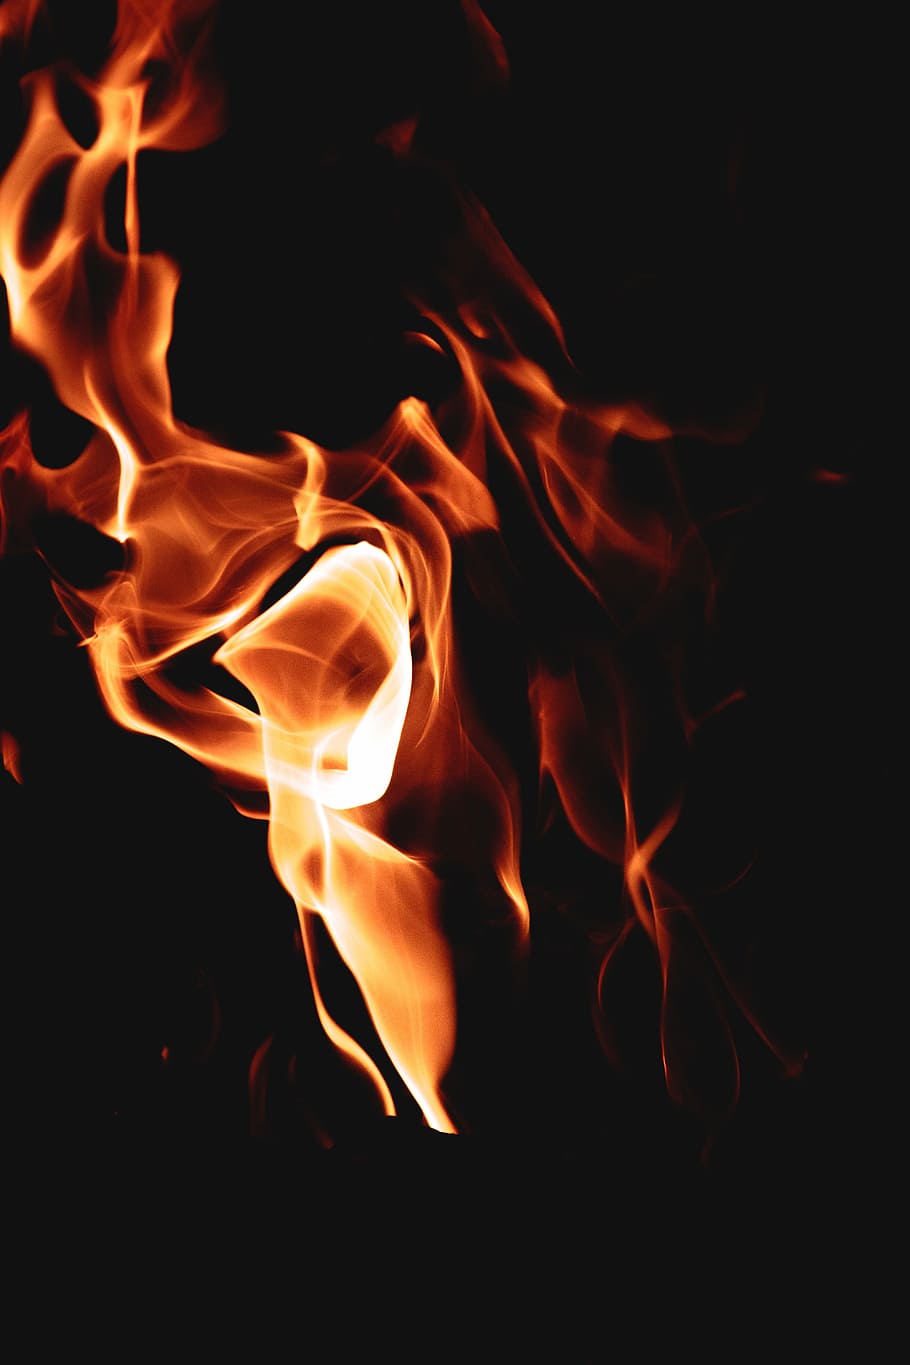 macro photography of flame, red fire, burn, heat, abstract, campfire